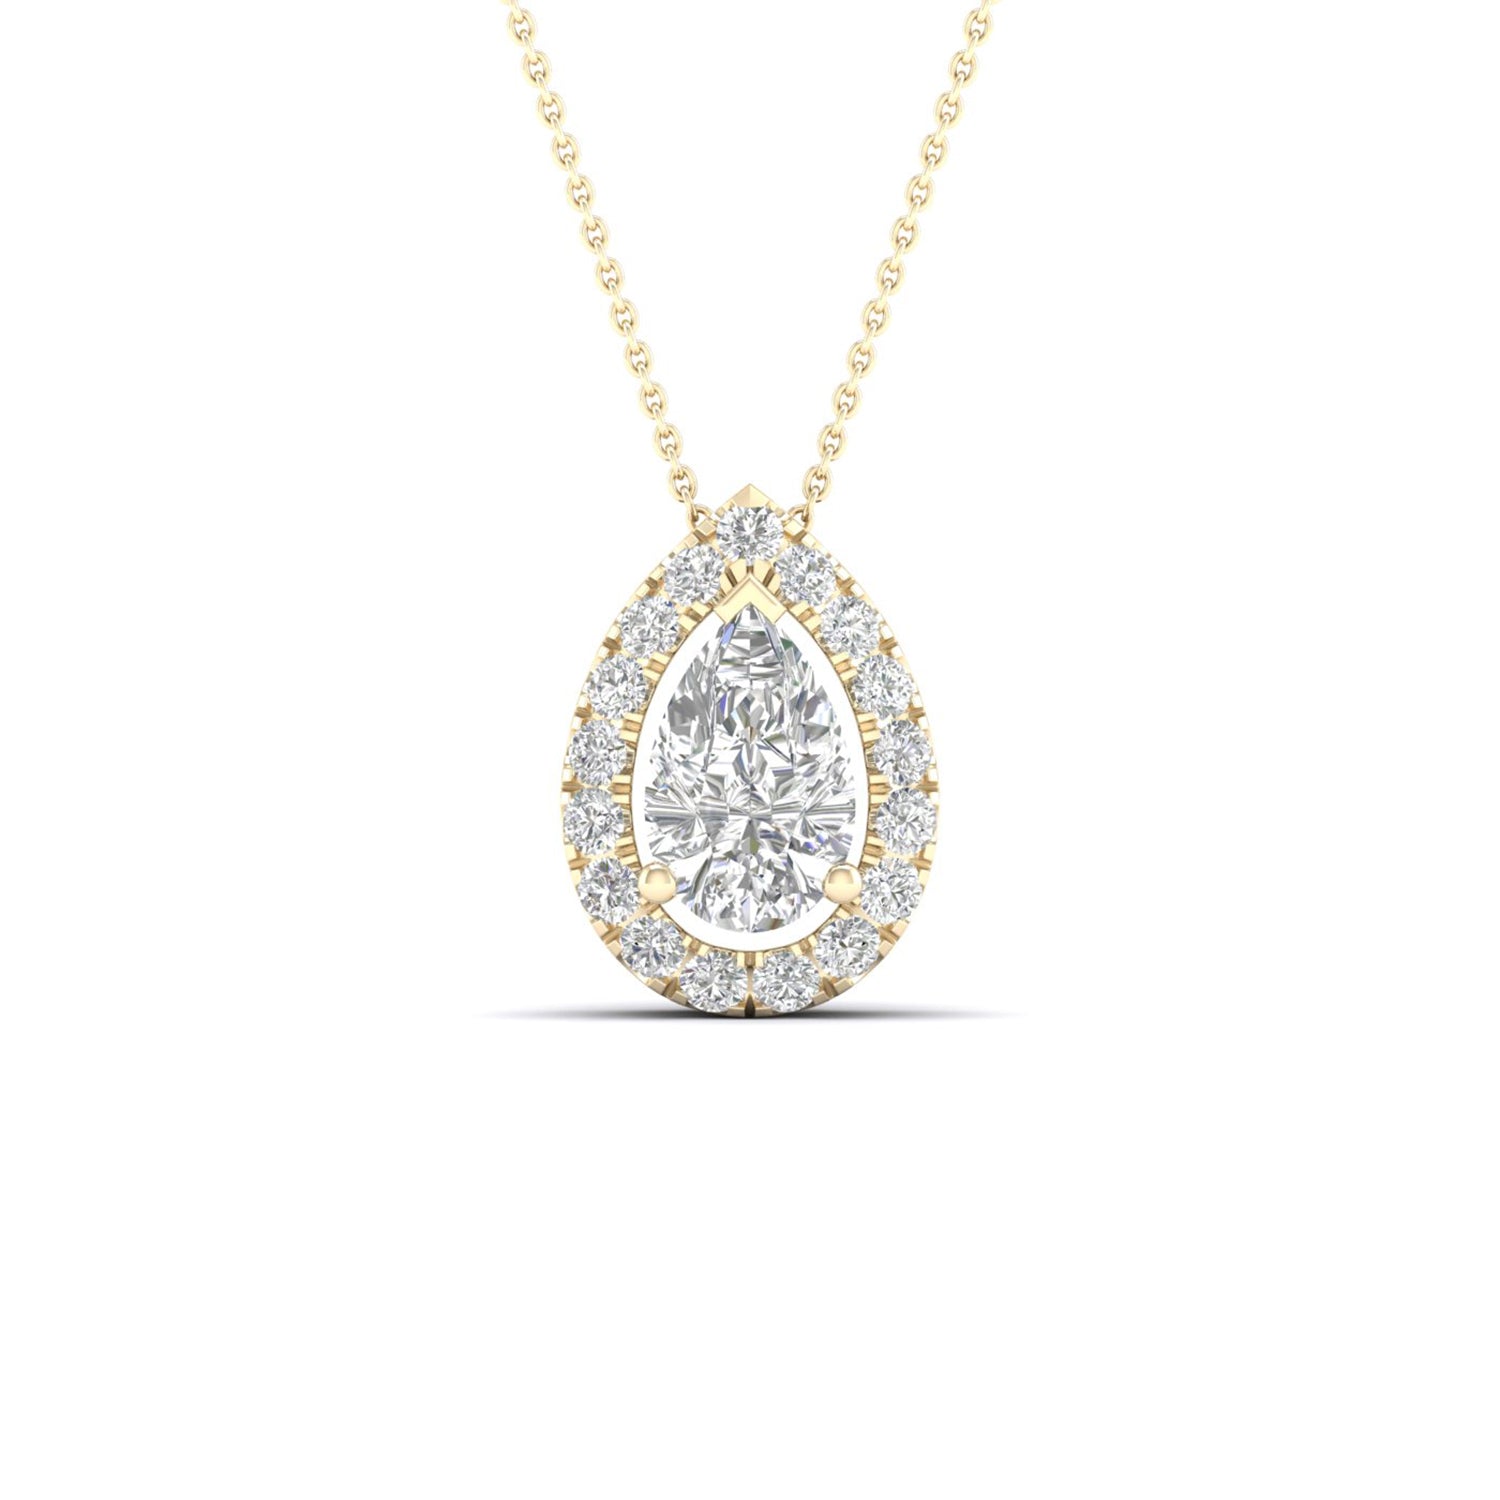 Dewdrop Halo Necklace_Product Angle_1/3Ct. - 1